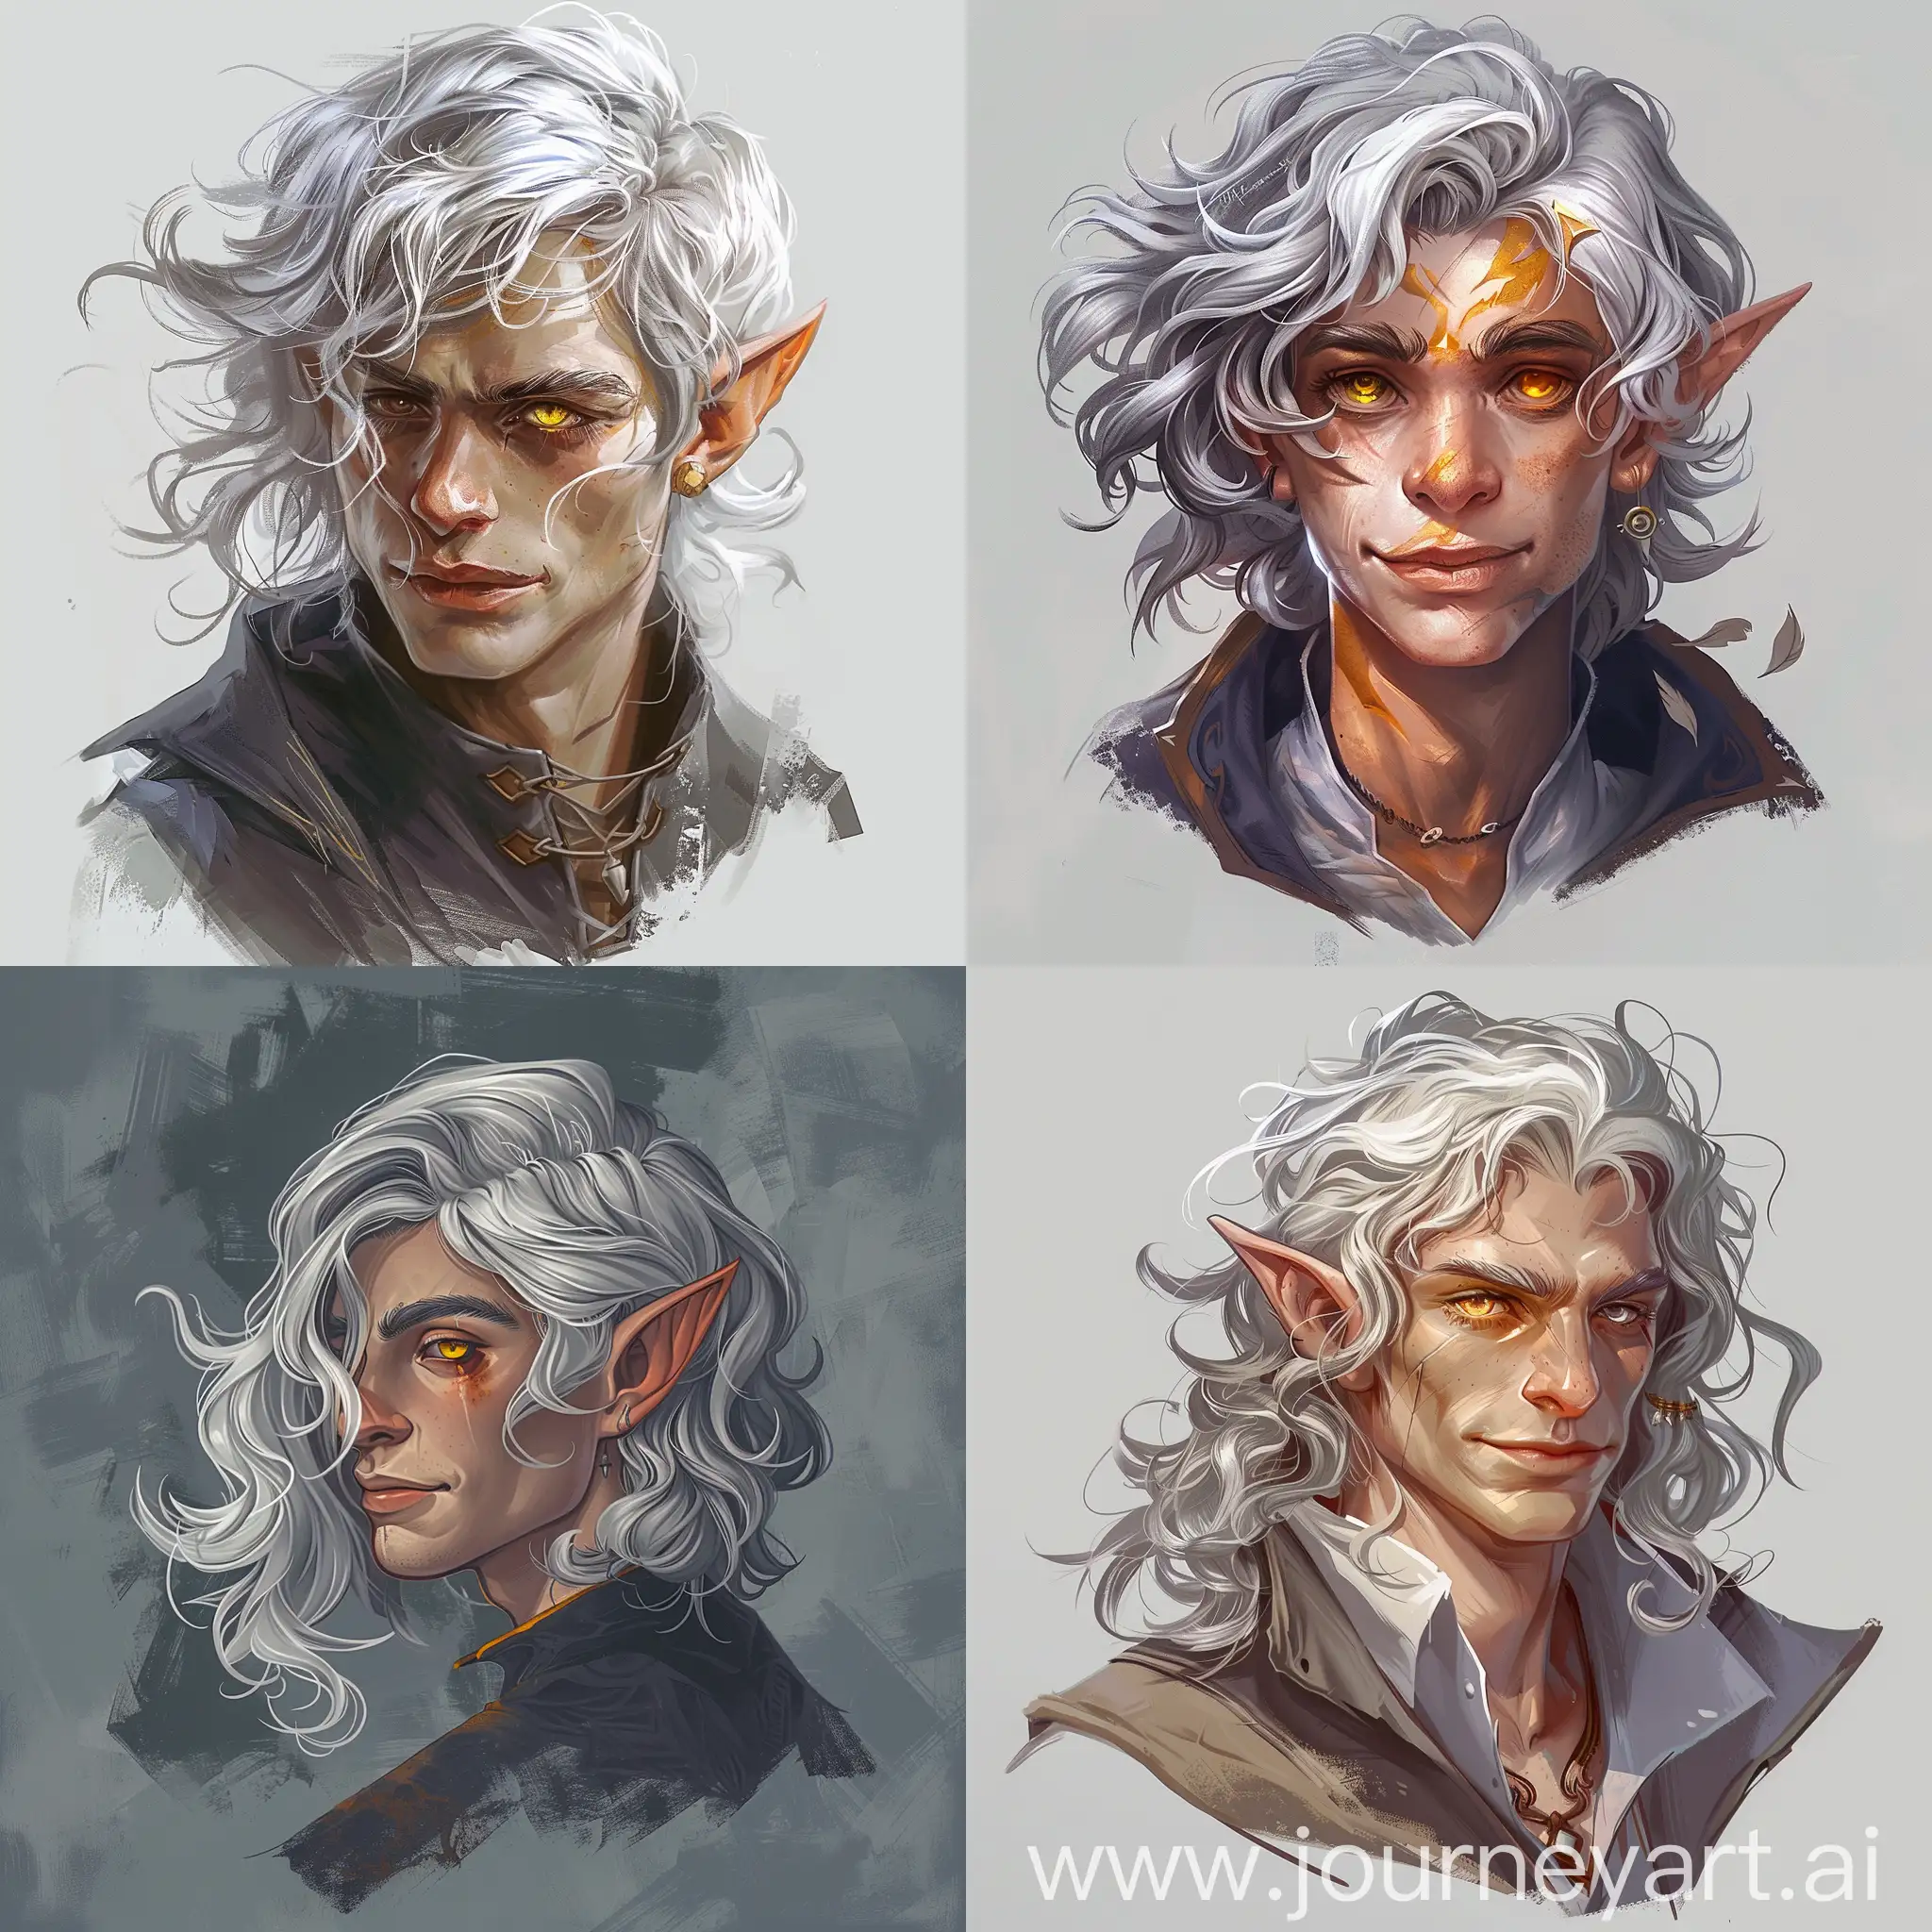 Generate a portrait of a fantasy half elf, who is a Bard from dungeons and dragons, focusing on a bust shot to highlight the upper body. The bard is youthful,  wavy silver hair. He has one gold eye and one silver eye. Depict the half elf as charming and handsome. Infuse the portrait with character and detail, capturing the essence of a charismatic fantasy figure.